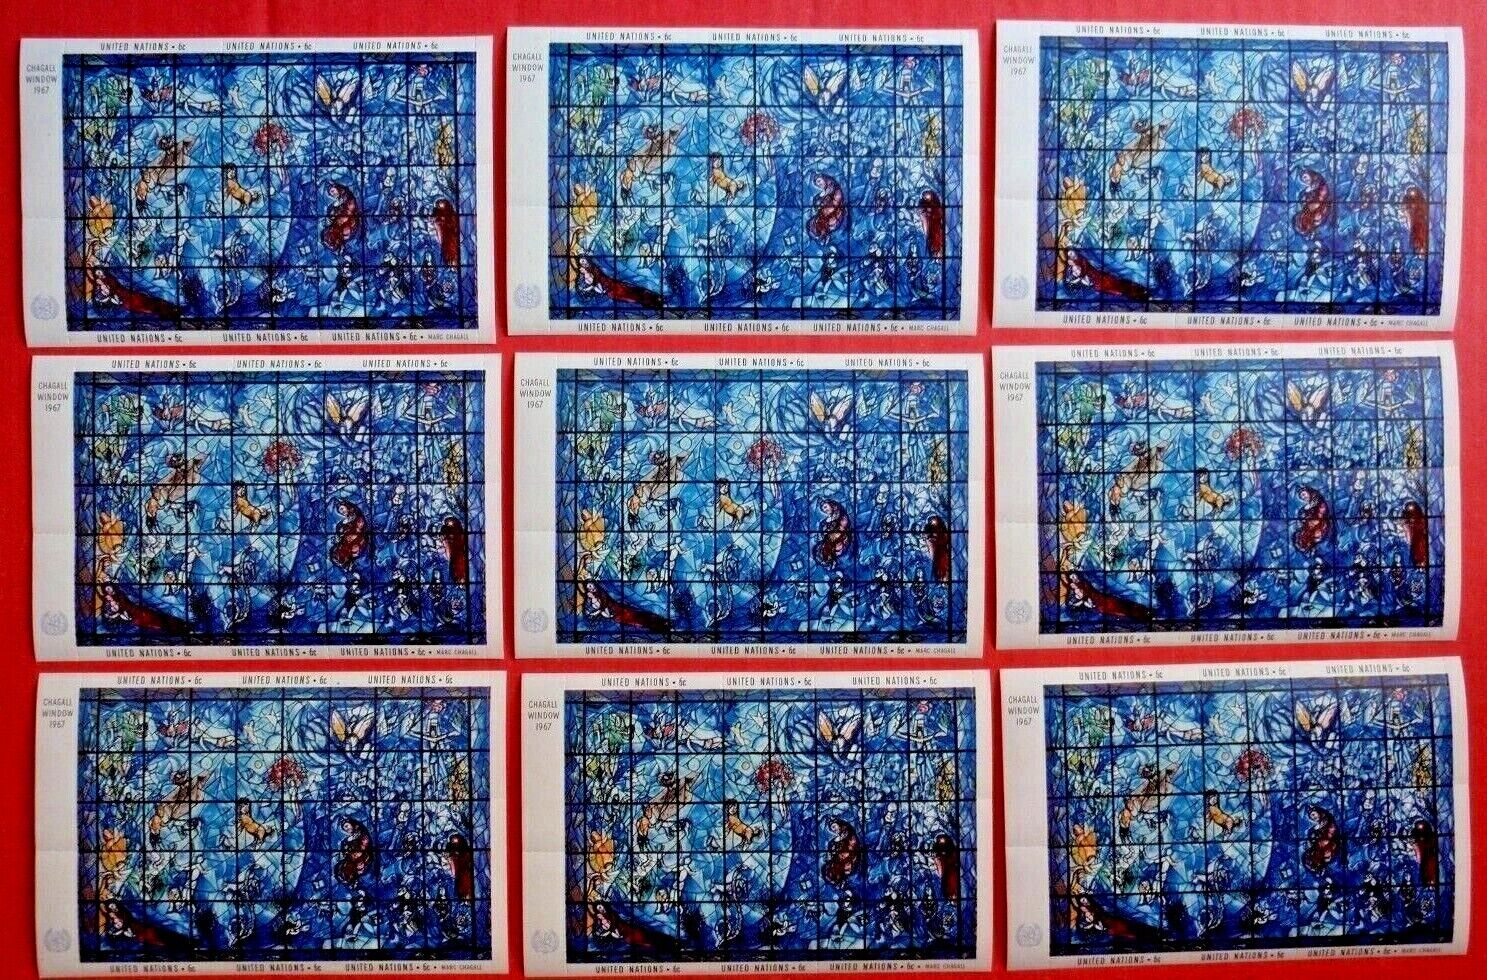 United Nations Chagall Window~NINE mini stamp sheets w/ SIX 6-cent stamps each Без бренда